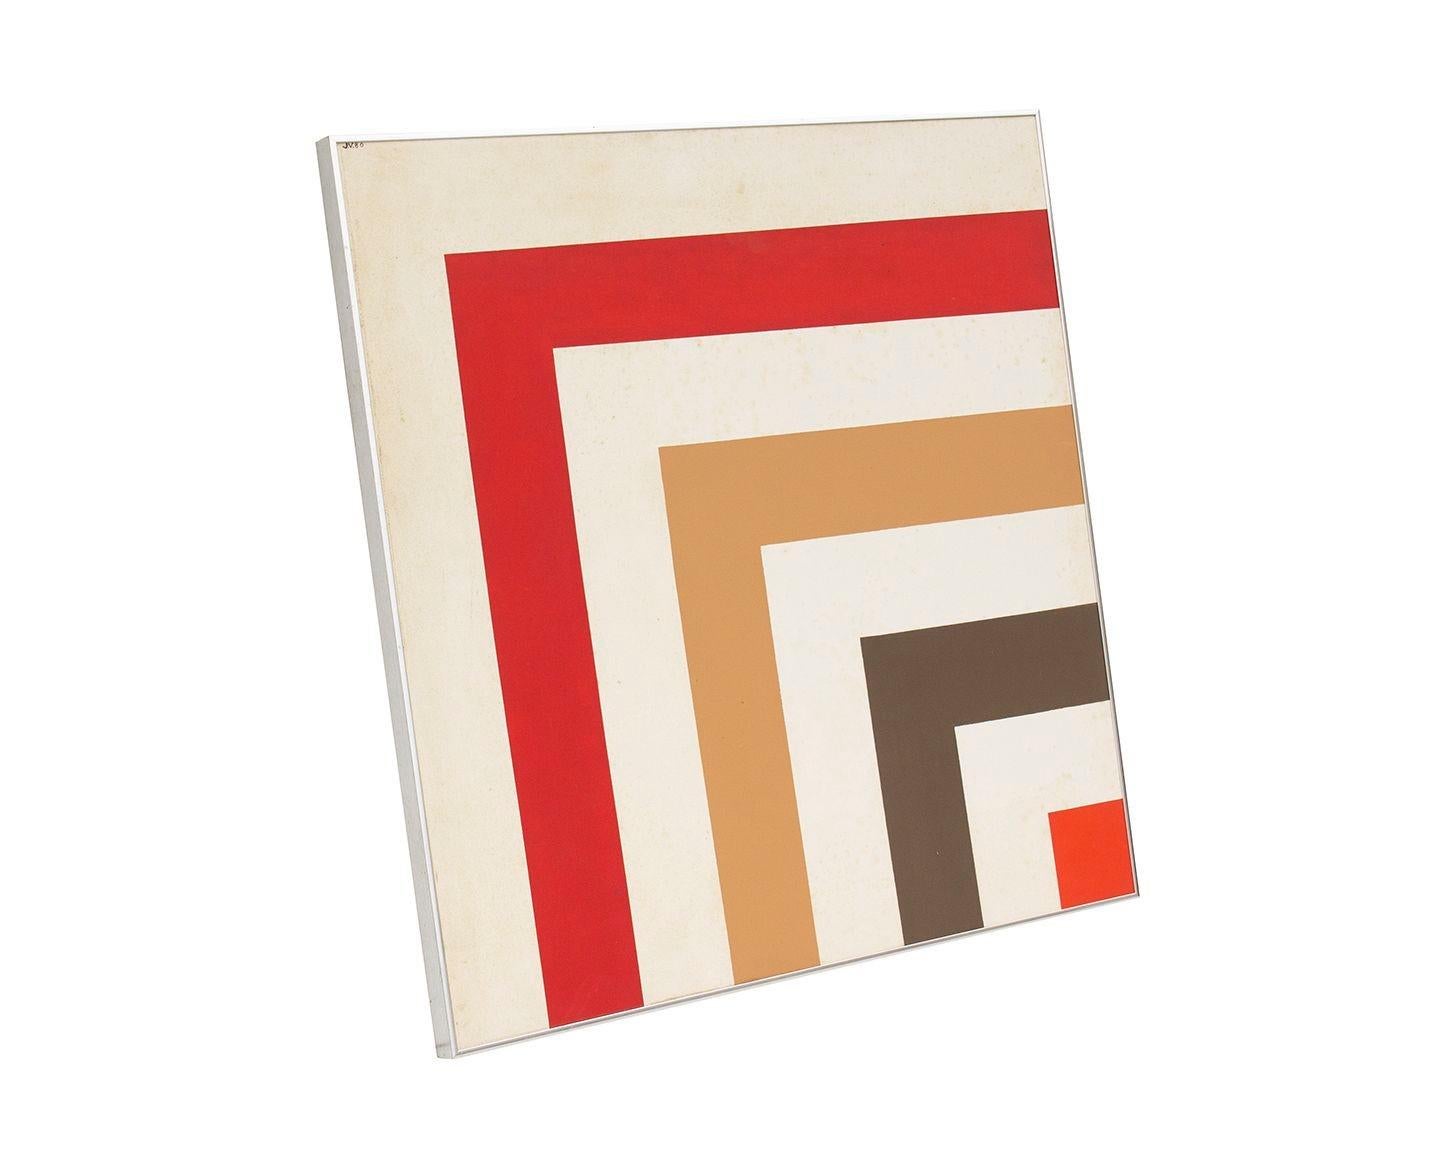 USA, 1980
Vintage hard edge abstract acrylic painting signed J.V. '80. Fun geometric style in red, caramel, and dark brown on a cream background, framed in silver. The mount is currently at one corner- if hung with current mount, it would hang